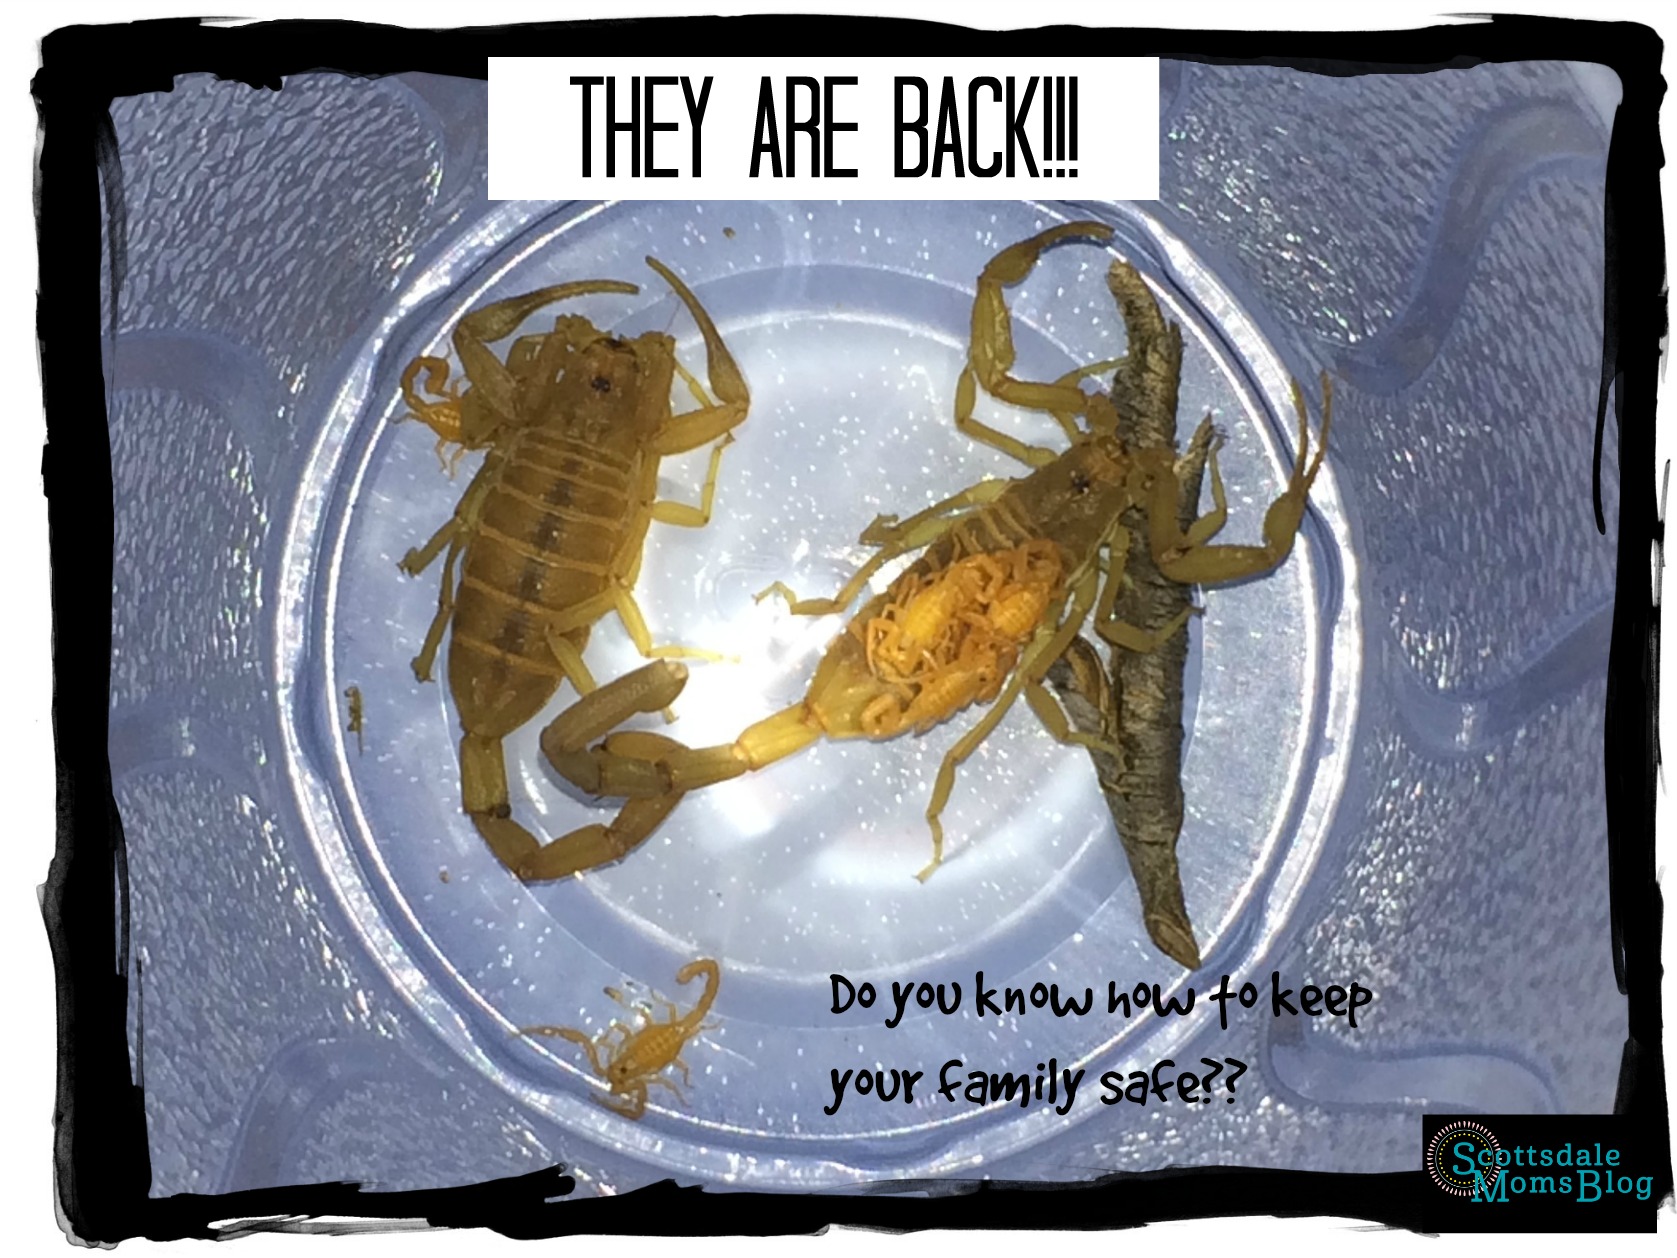 Scorpions – What YOU can do to keep your family safe